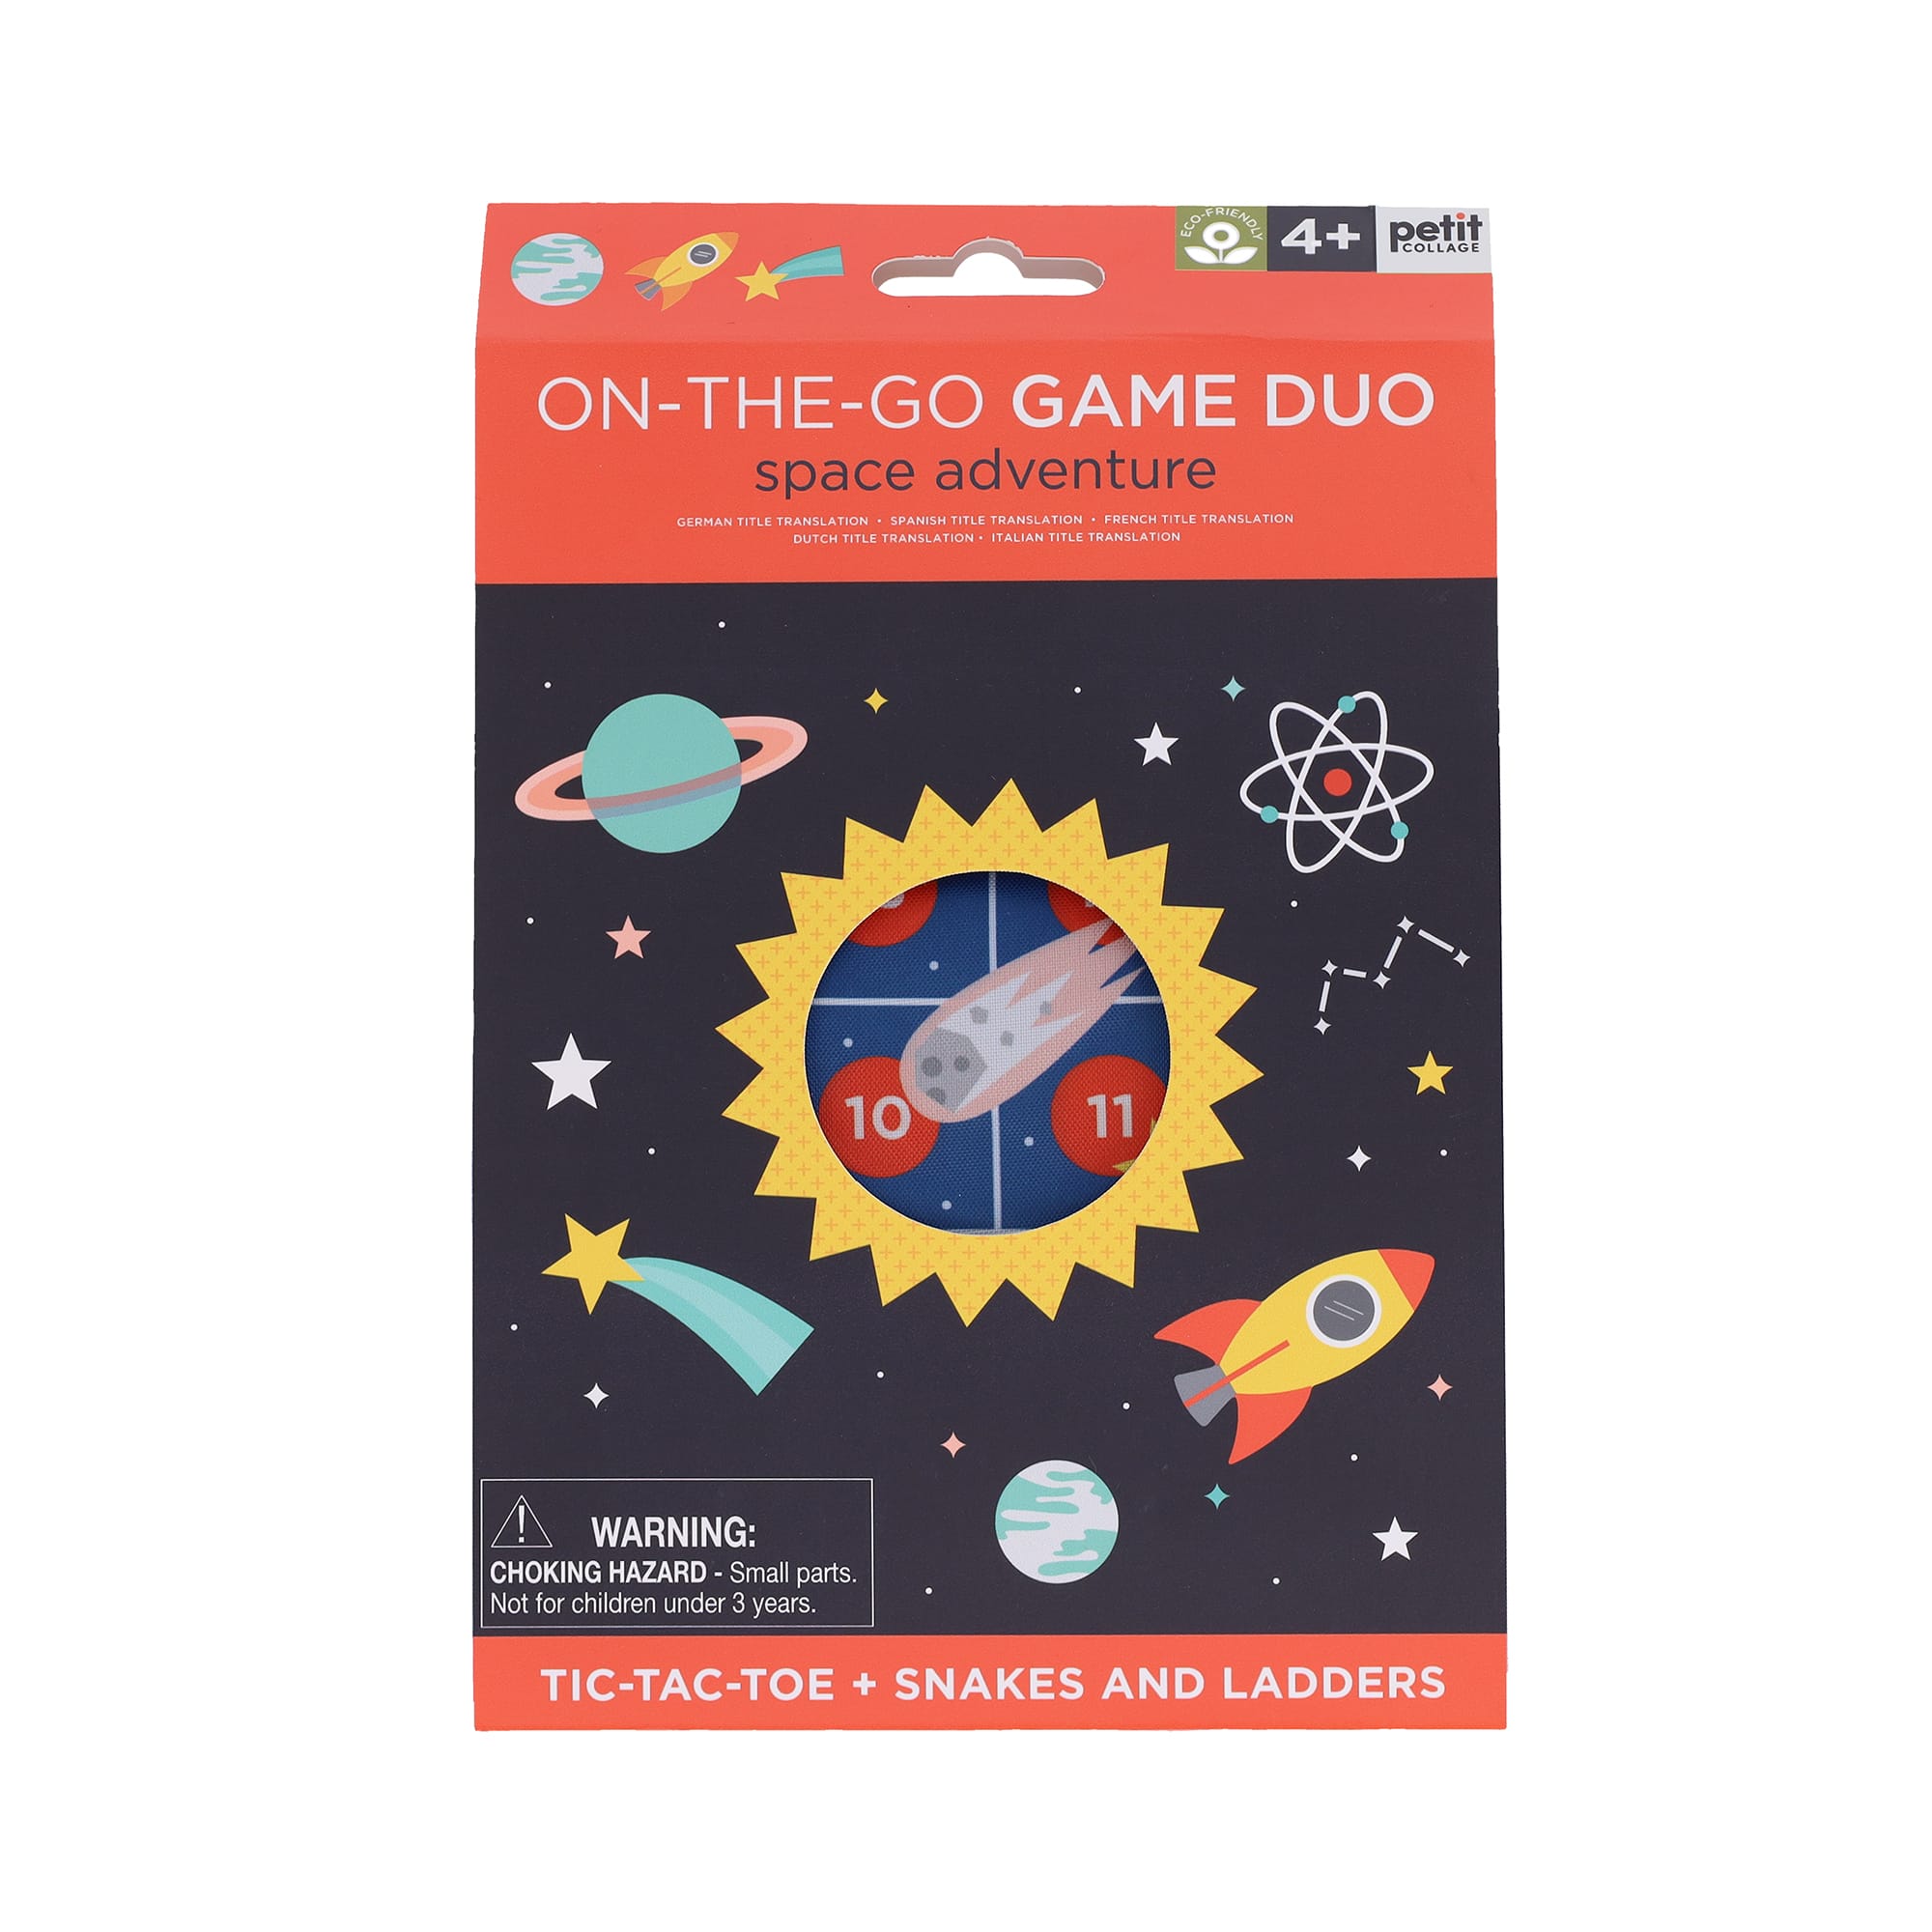 On-The-Go Game Duo Space Adventure